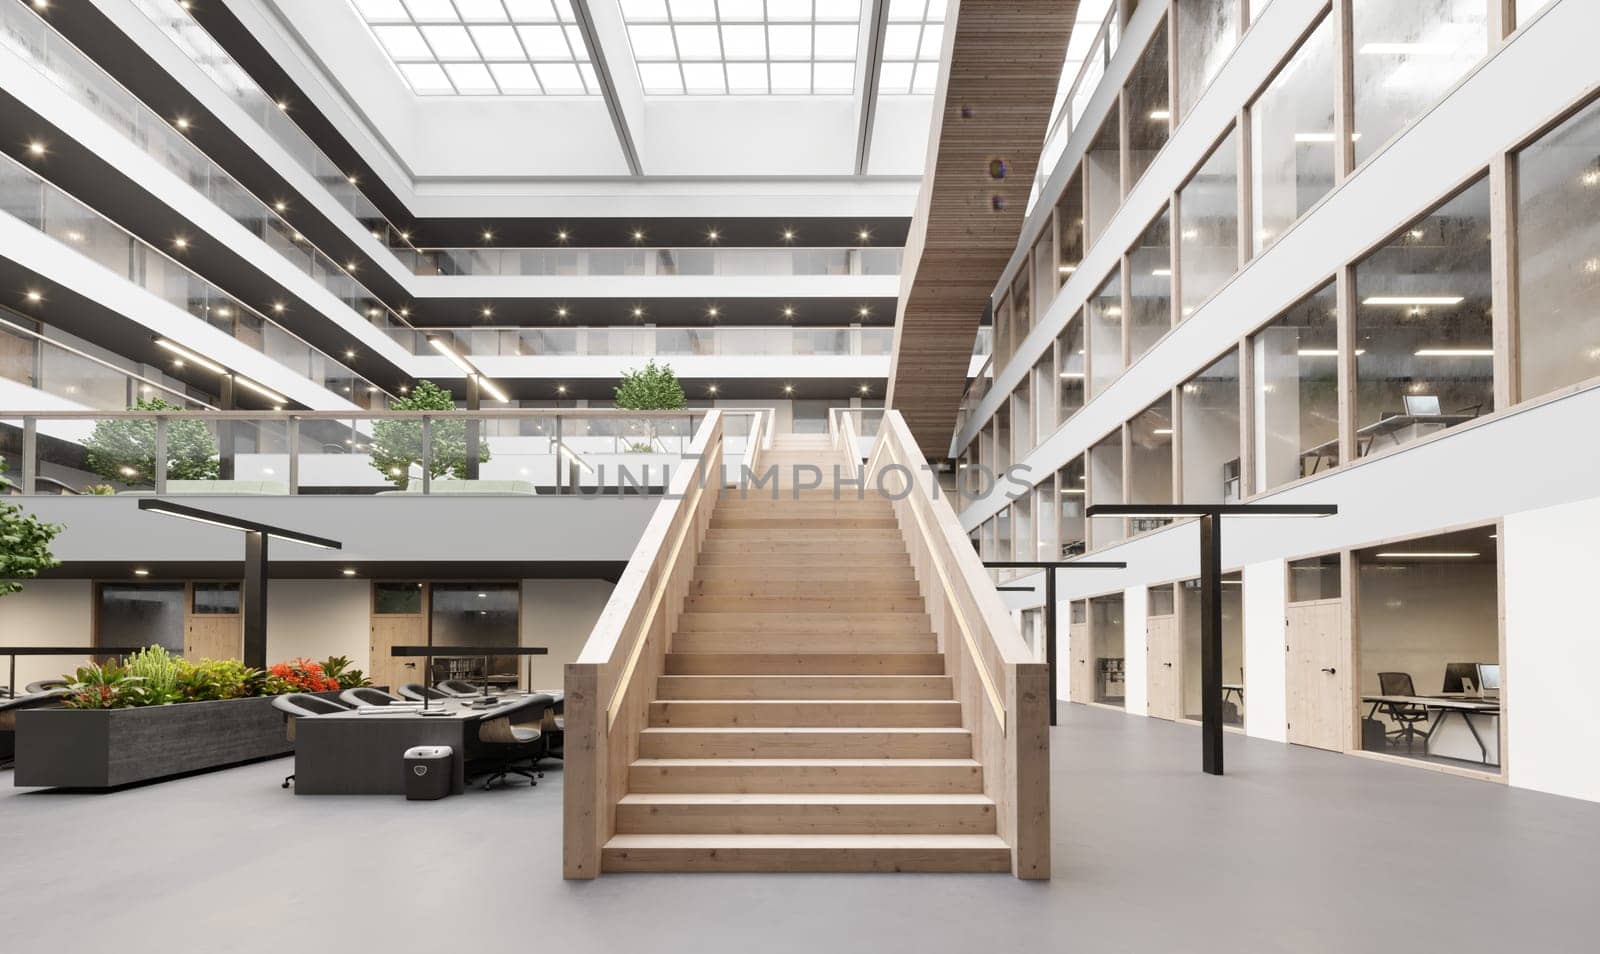 3d rendering interior of a modern office building with stairway